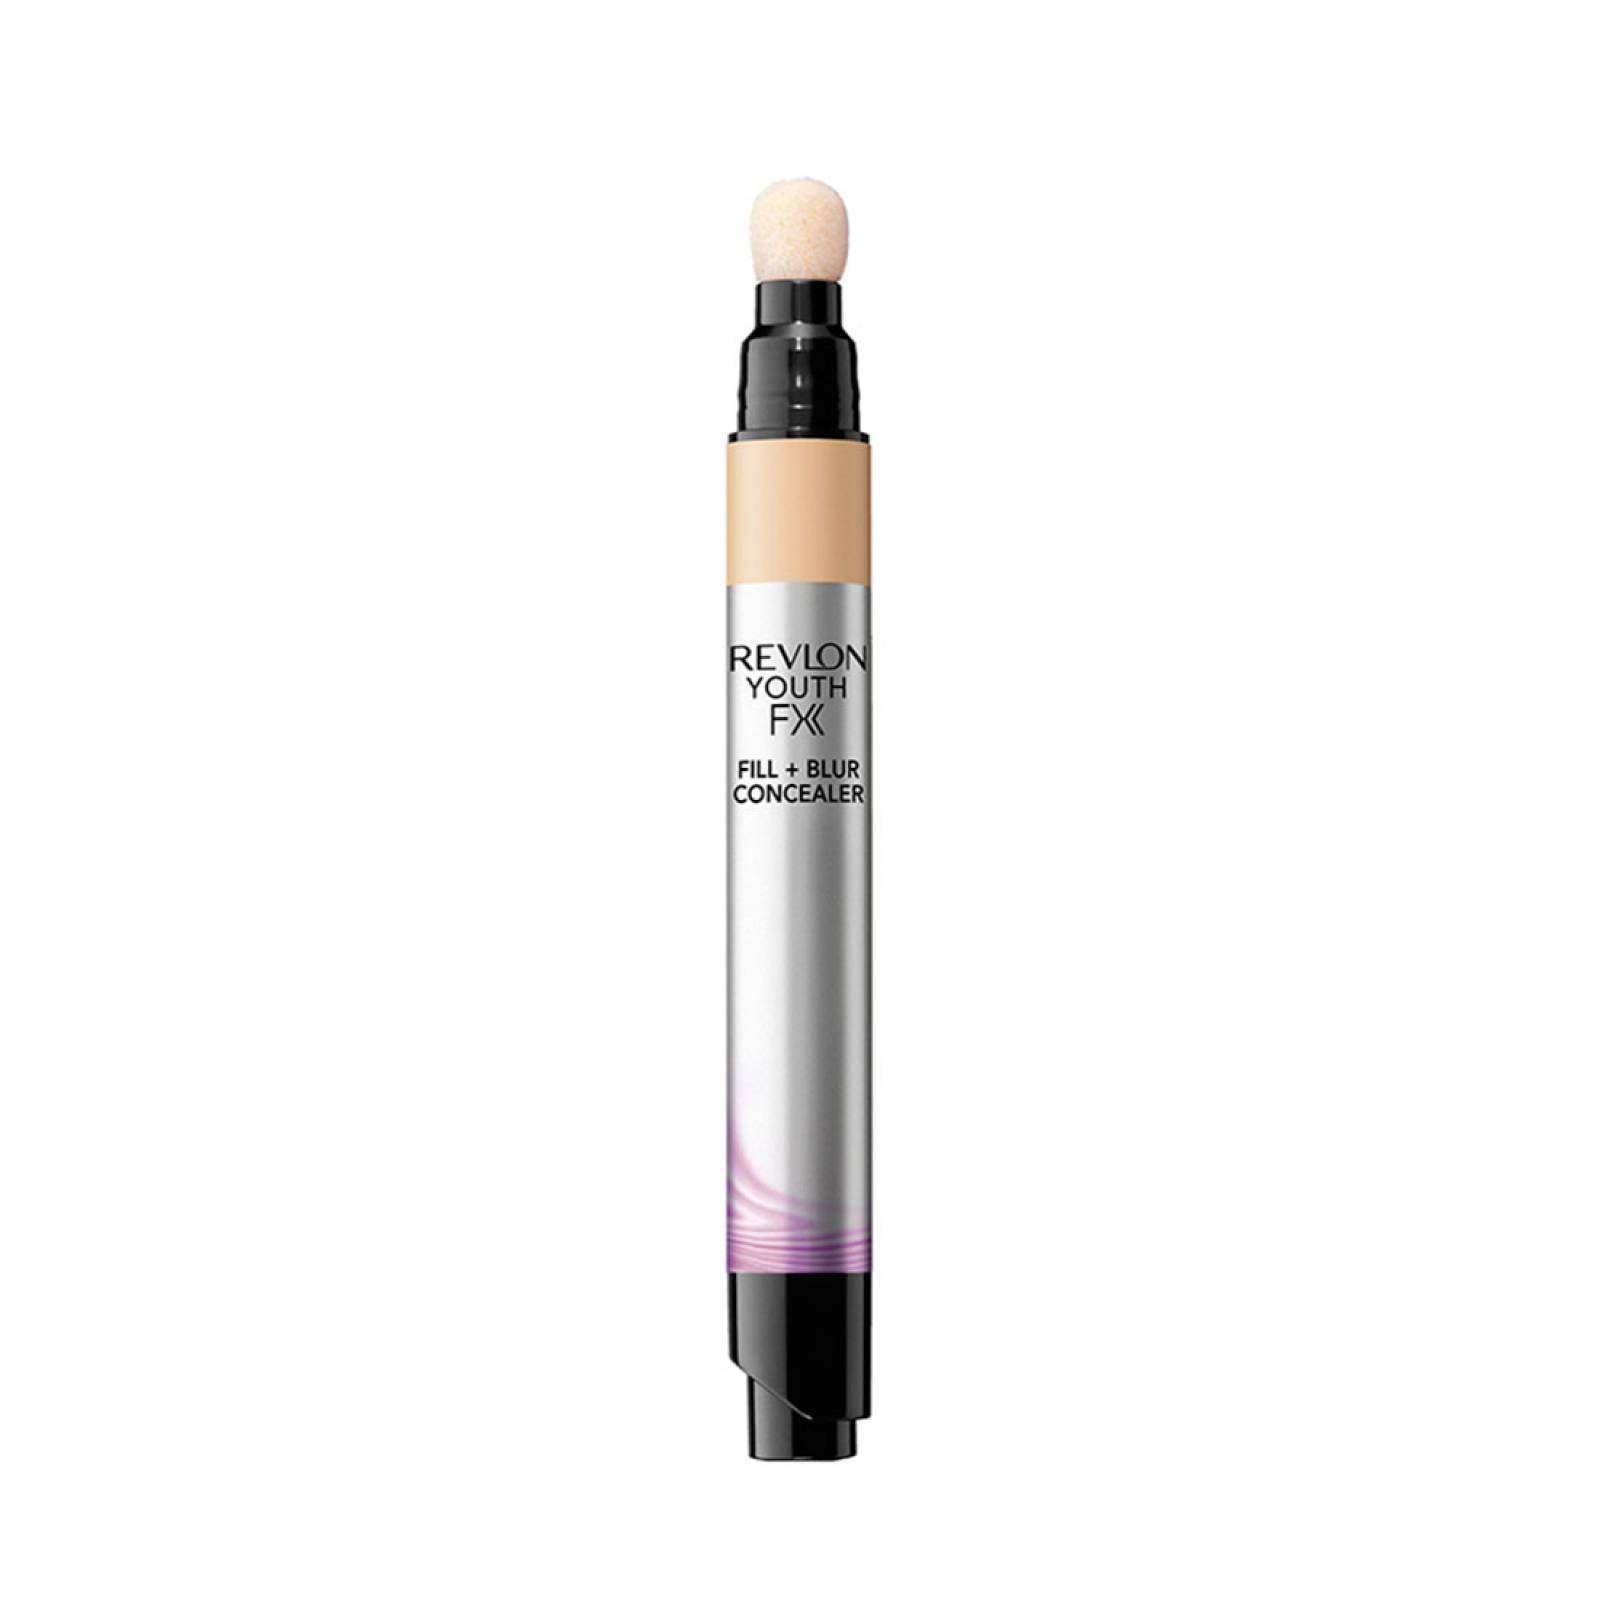 Correctores Maquillaje Youth FX Fill + Blur Concealer Revlon